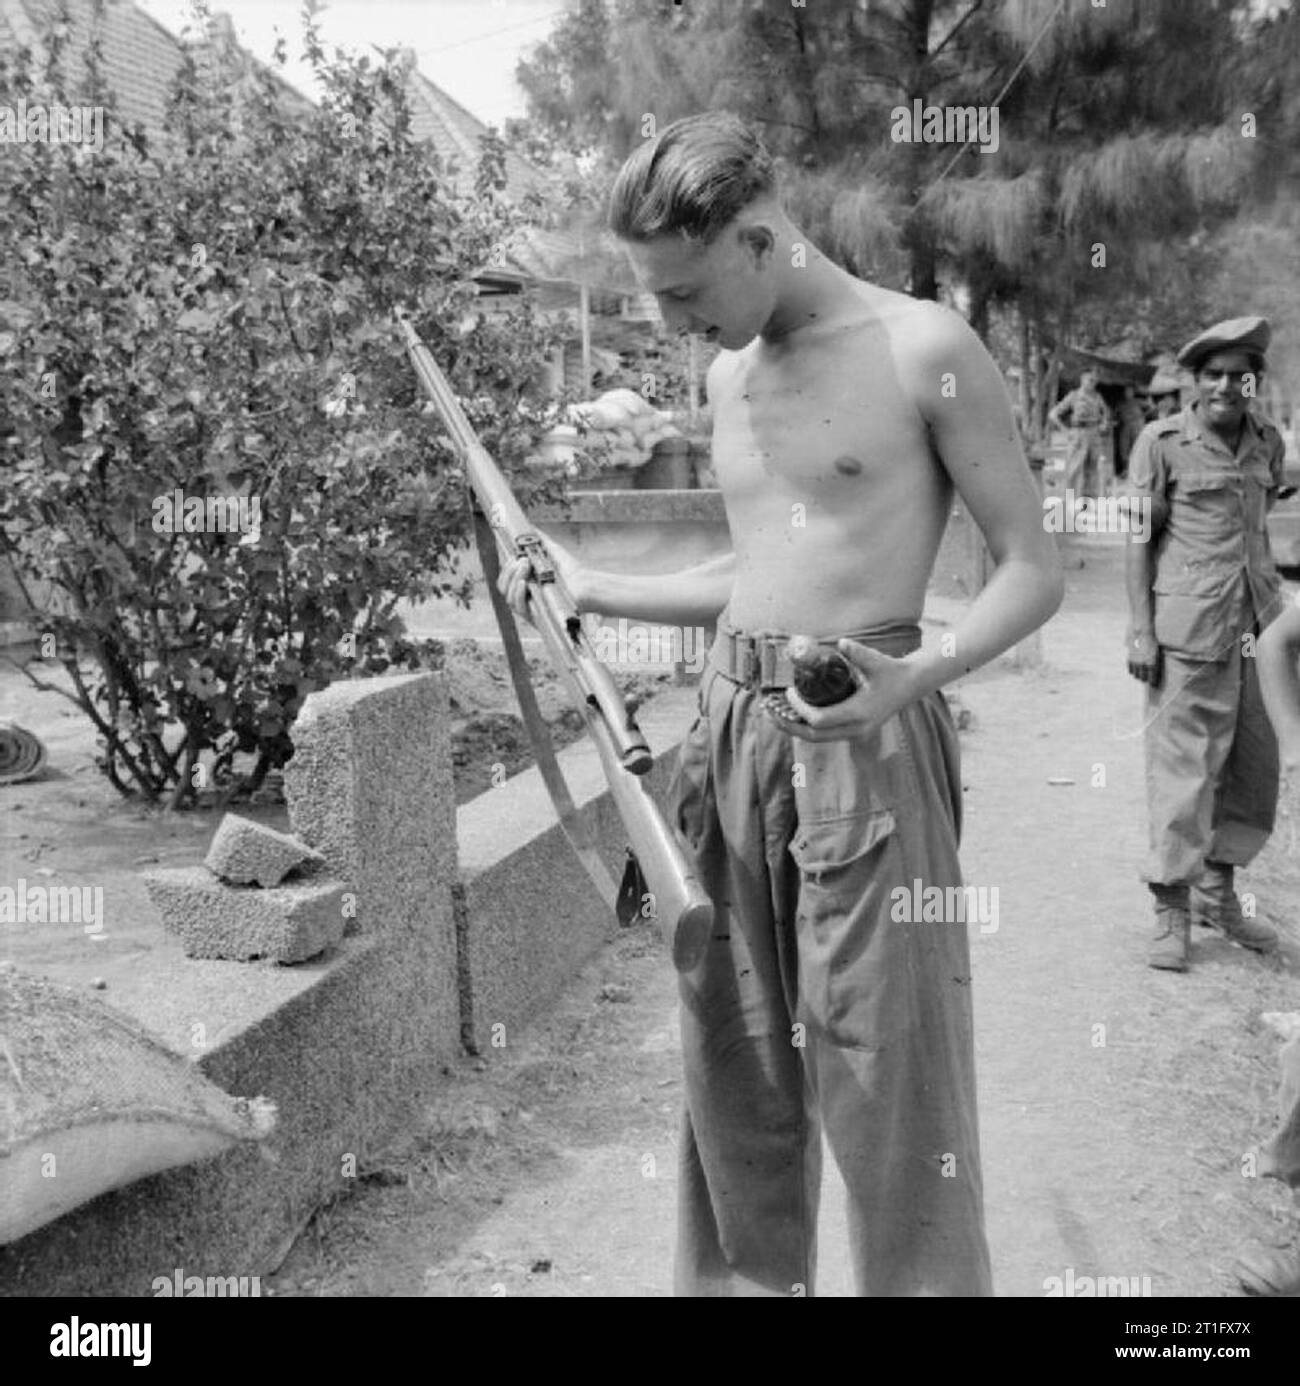 The British Occupation of Java A British soldier holding a Japanese rifle and a molotov cocktail, typical weapons used by Indonesian nationalists in the fighting in Surabaya (Soerabaja). Stock Photo